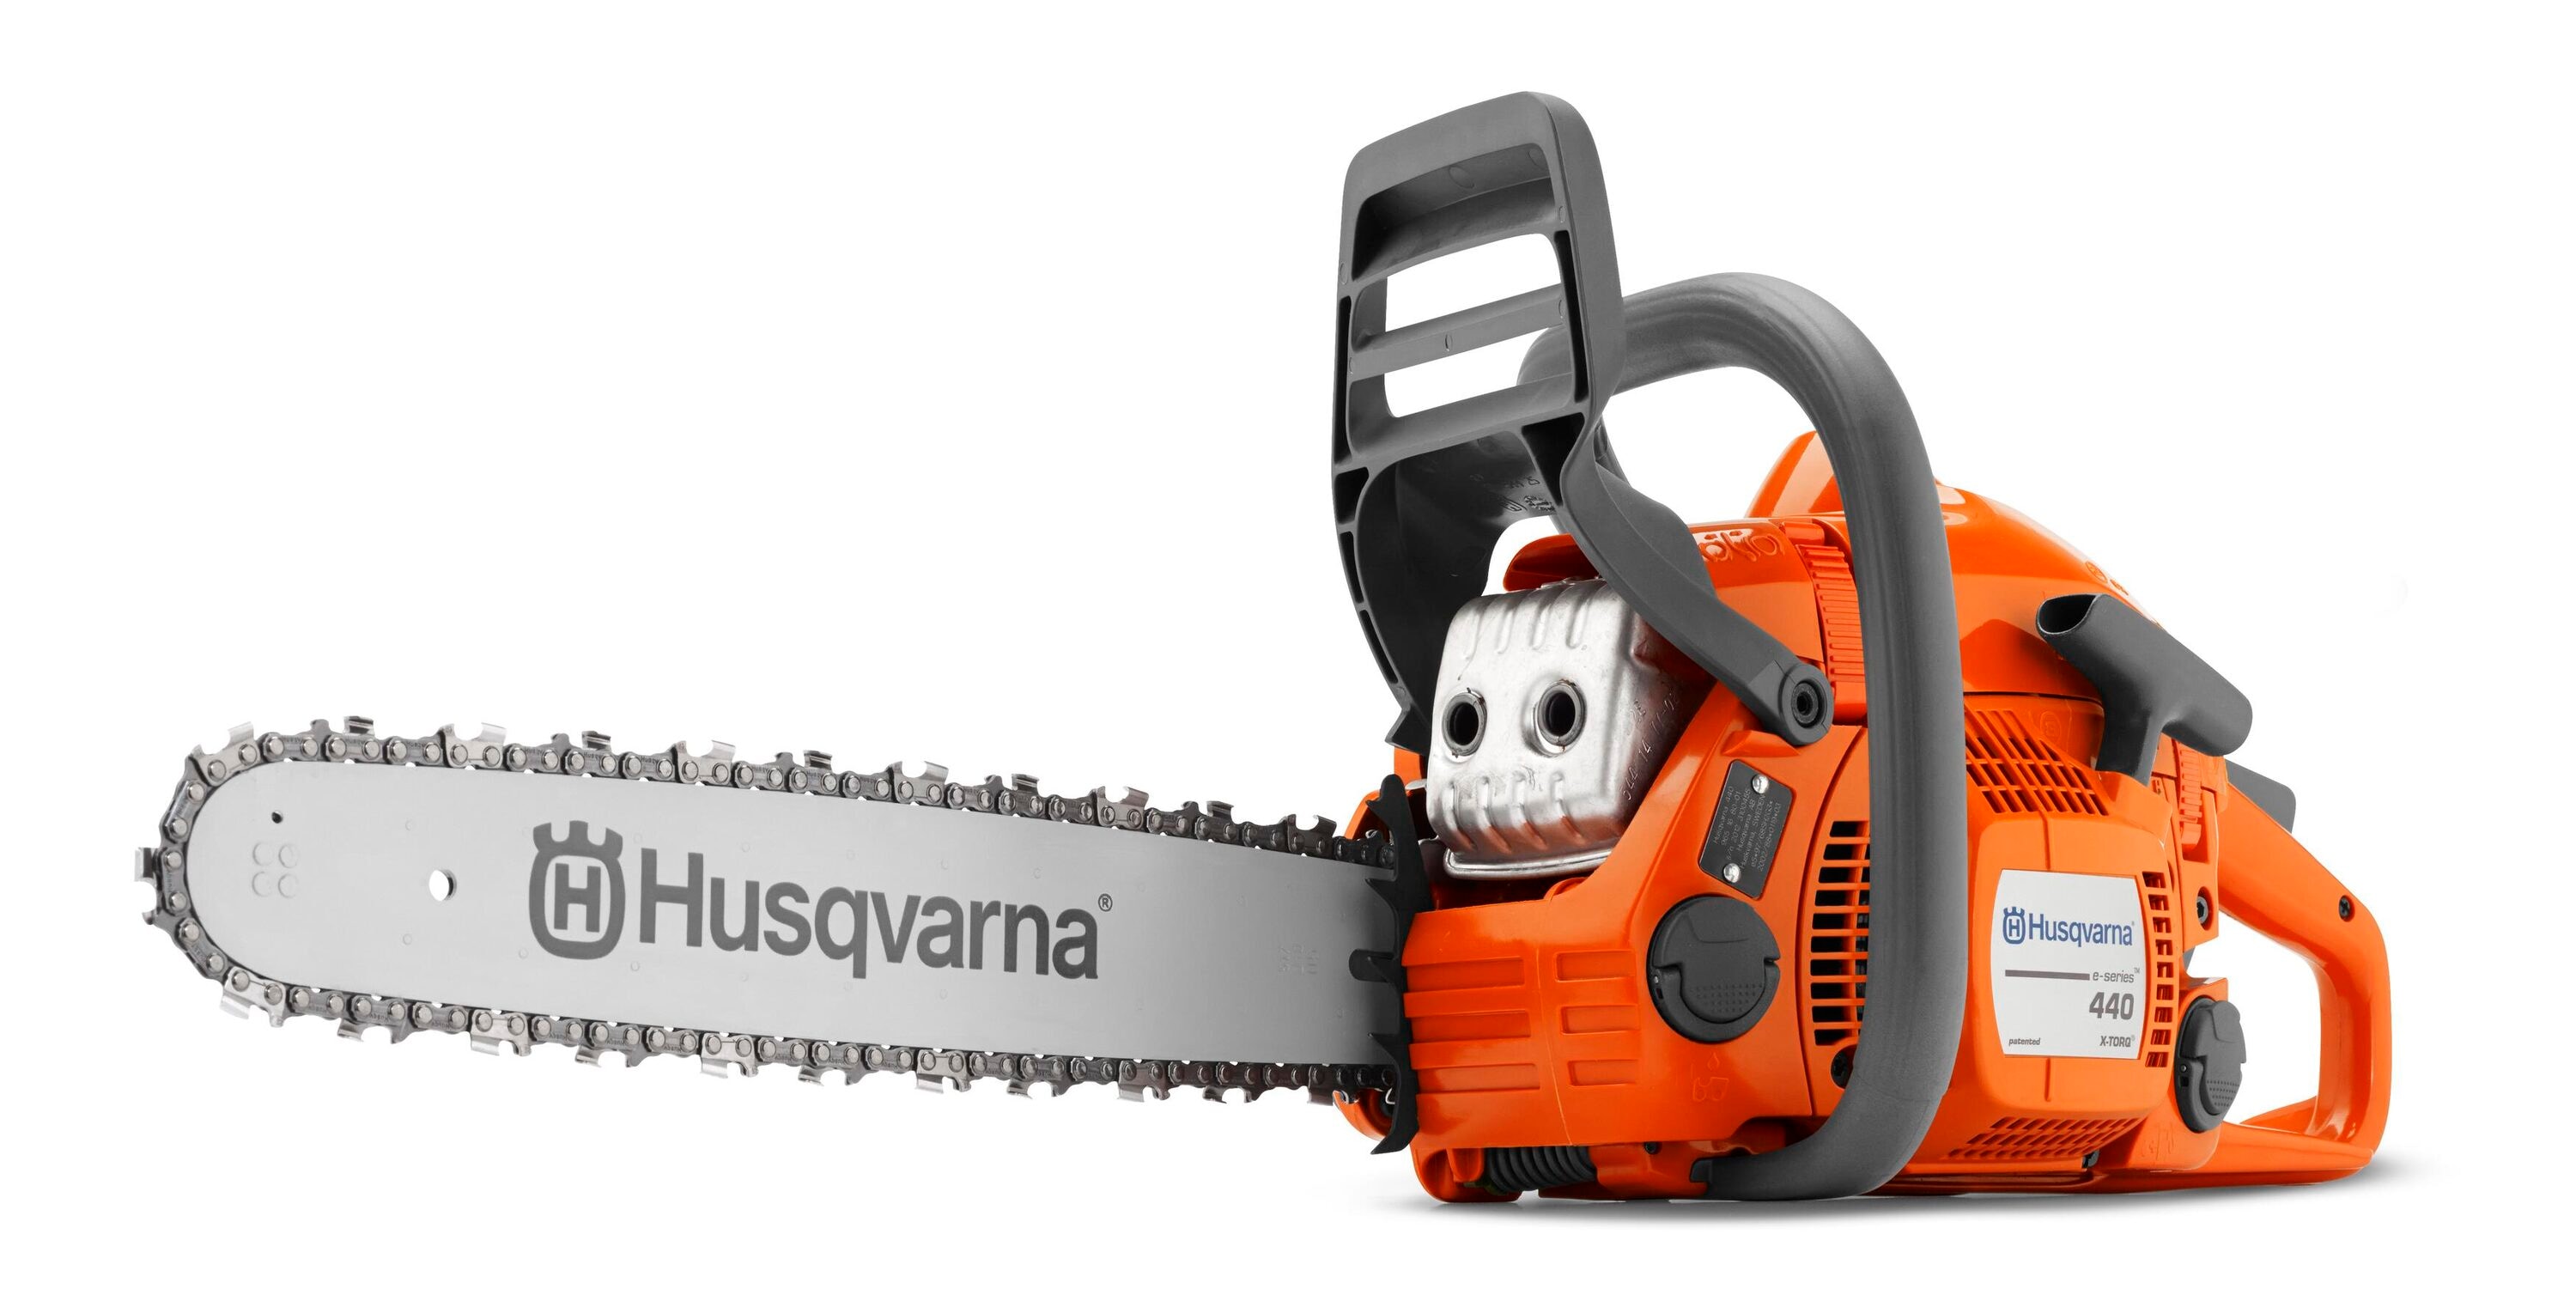 Husqvarna 440 18-in 40.9-cc 2-Cycle Gas Chainsaw at Lowes.com